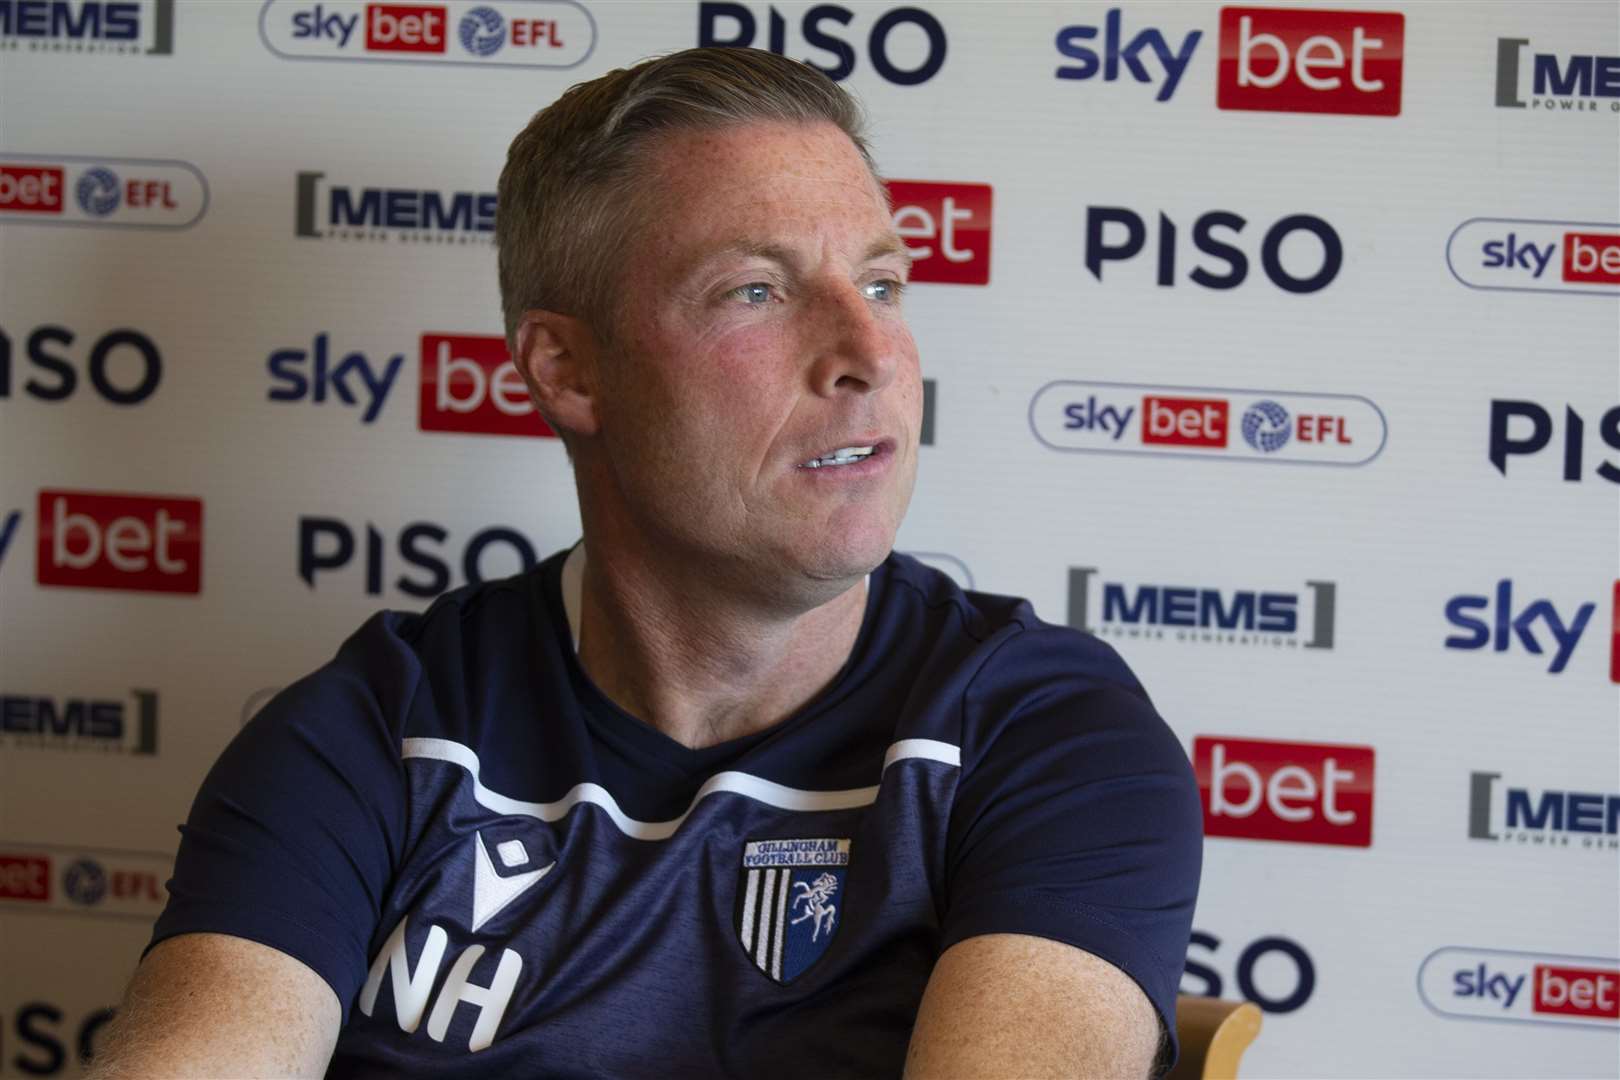 Gillingham manager Neil Harris accepts the criticism coming their way but hopes to turn things around with new January arrivals